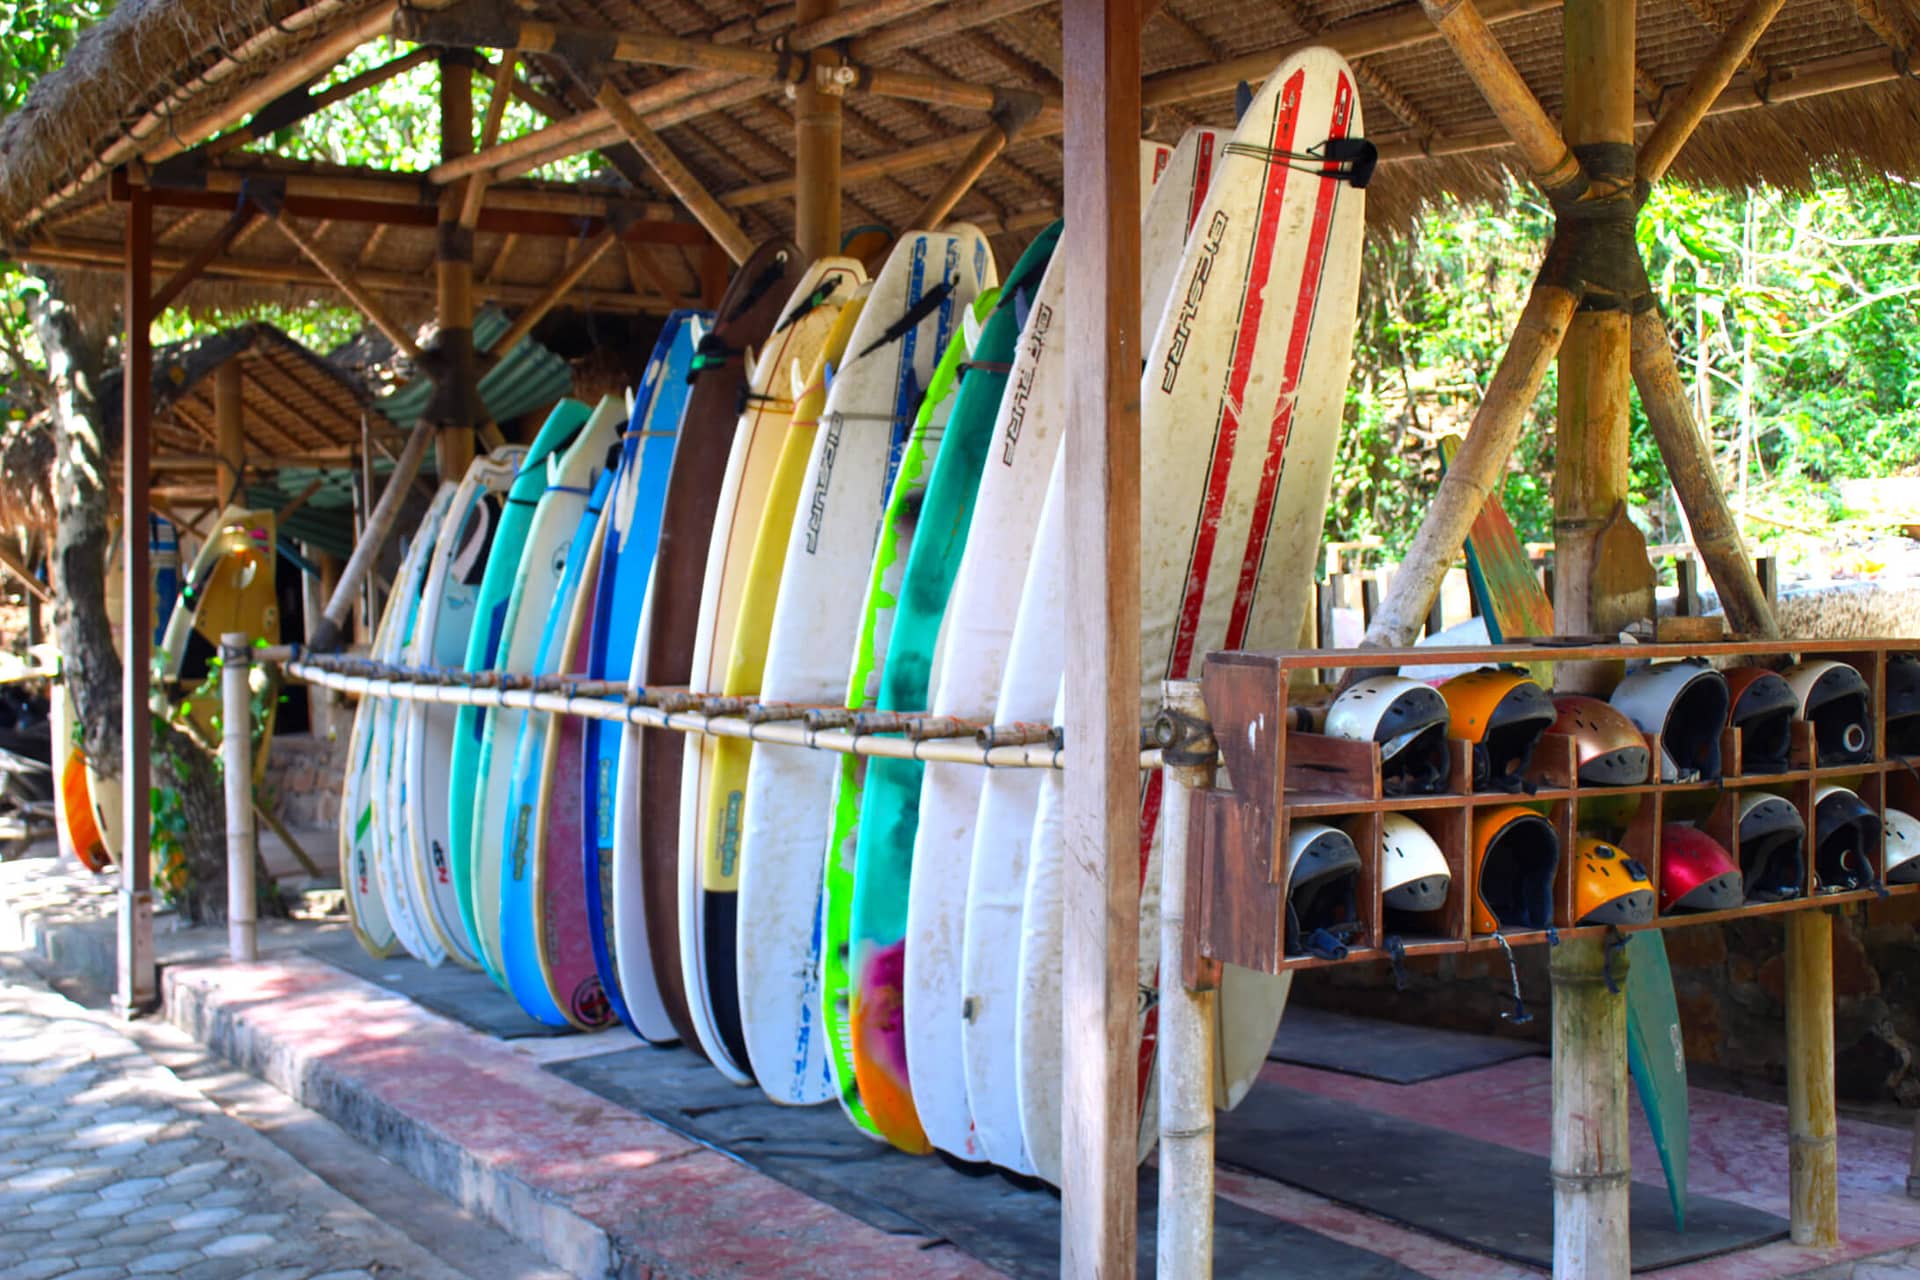 2. Introduction to Surf Equipment